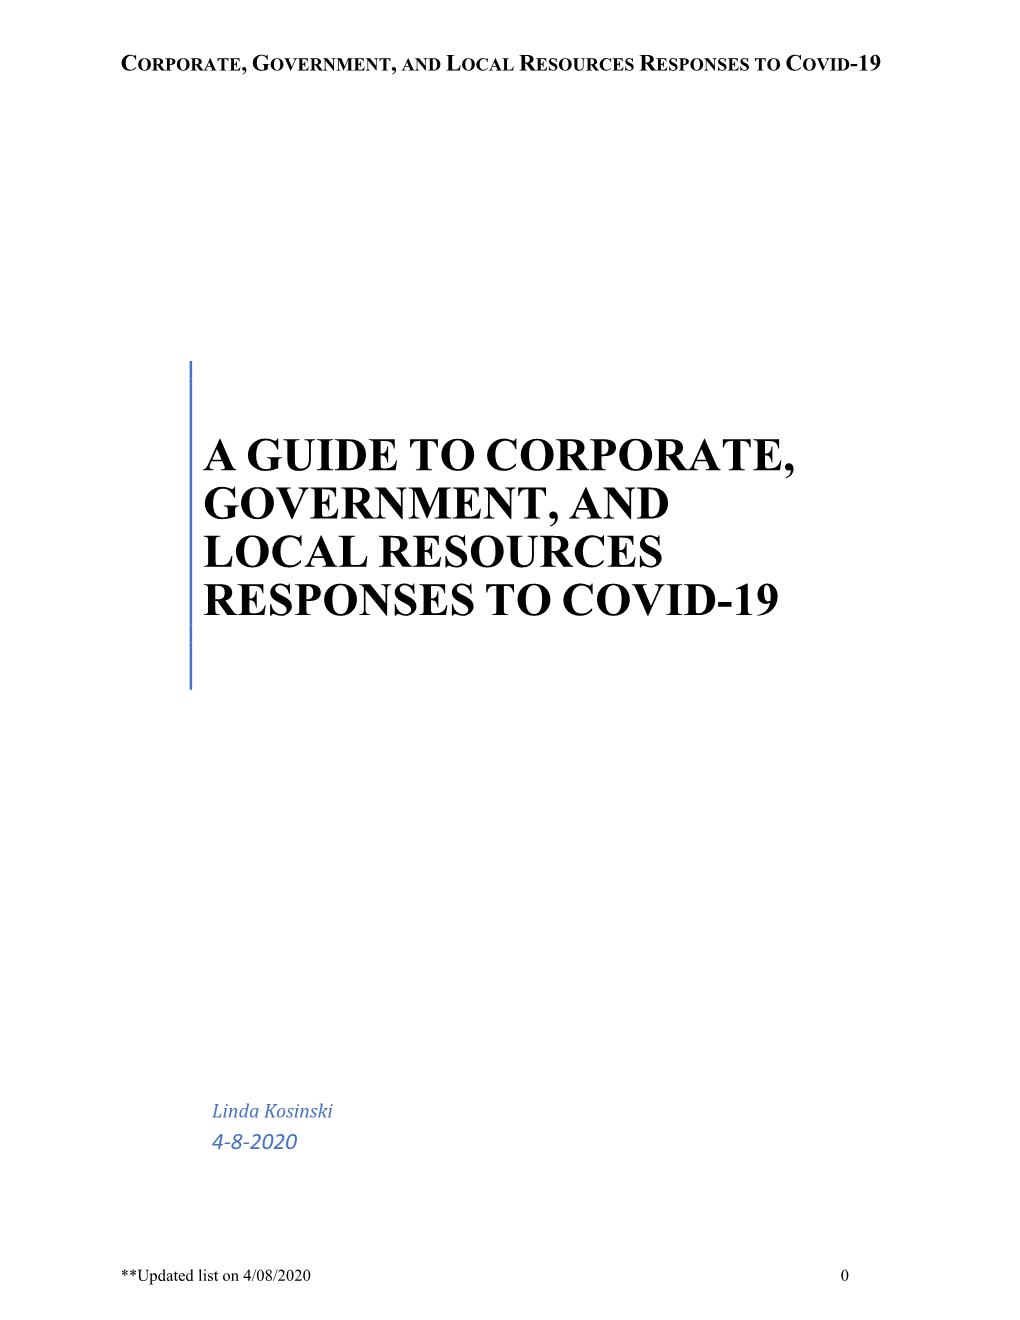 A Guide to Corporate, Government, and Local Resources Responses to Covid-19